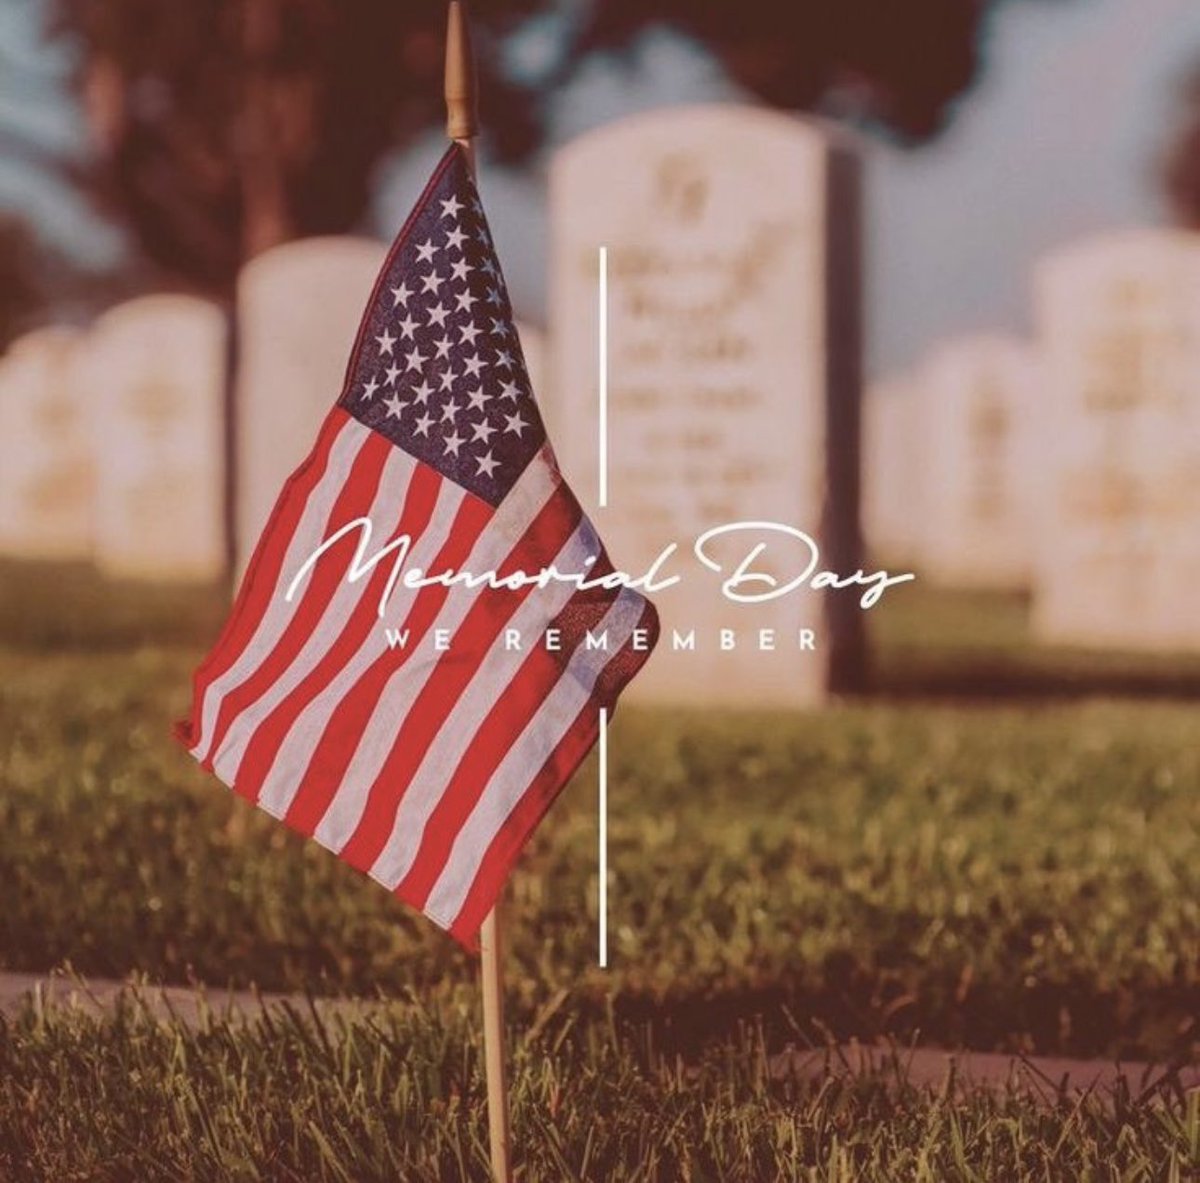 Honoring all those who made the ultimate sacrifice for our safety and freedom. #MemorialDay